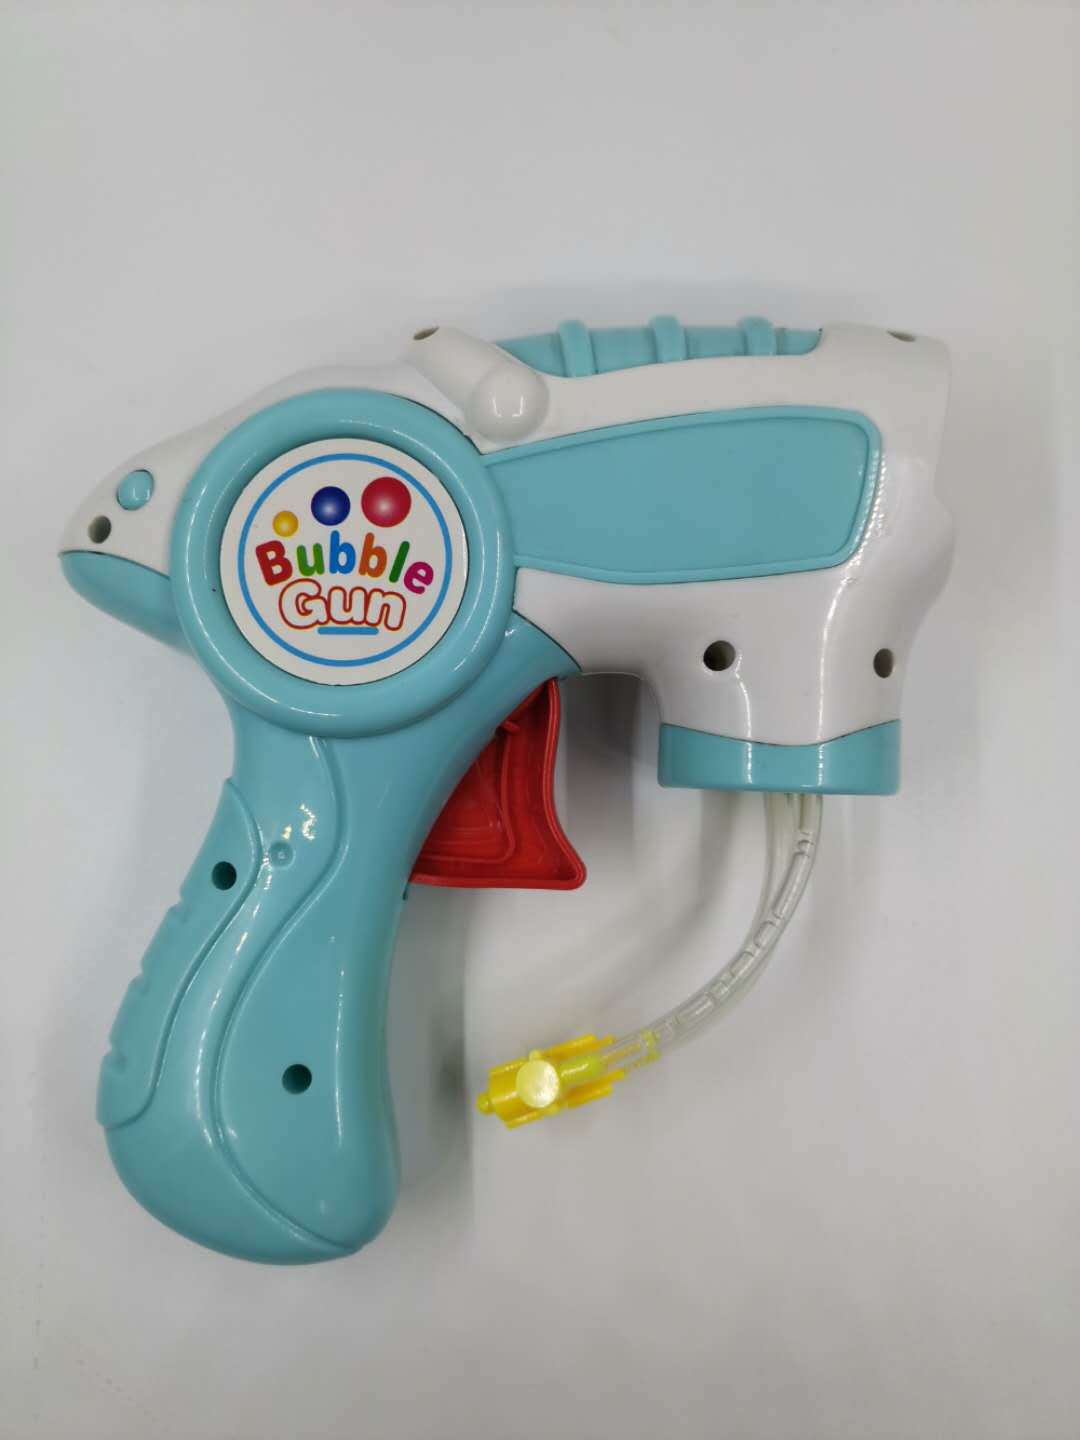 Electric Bubble Blower Bubble Water Supplement Liquid Toy